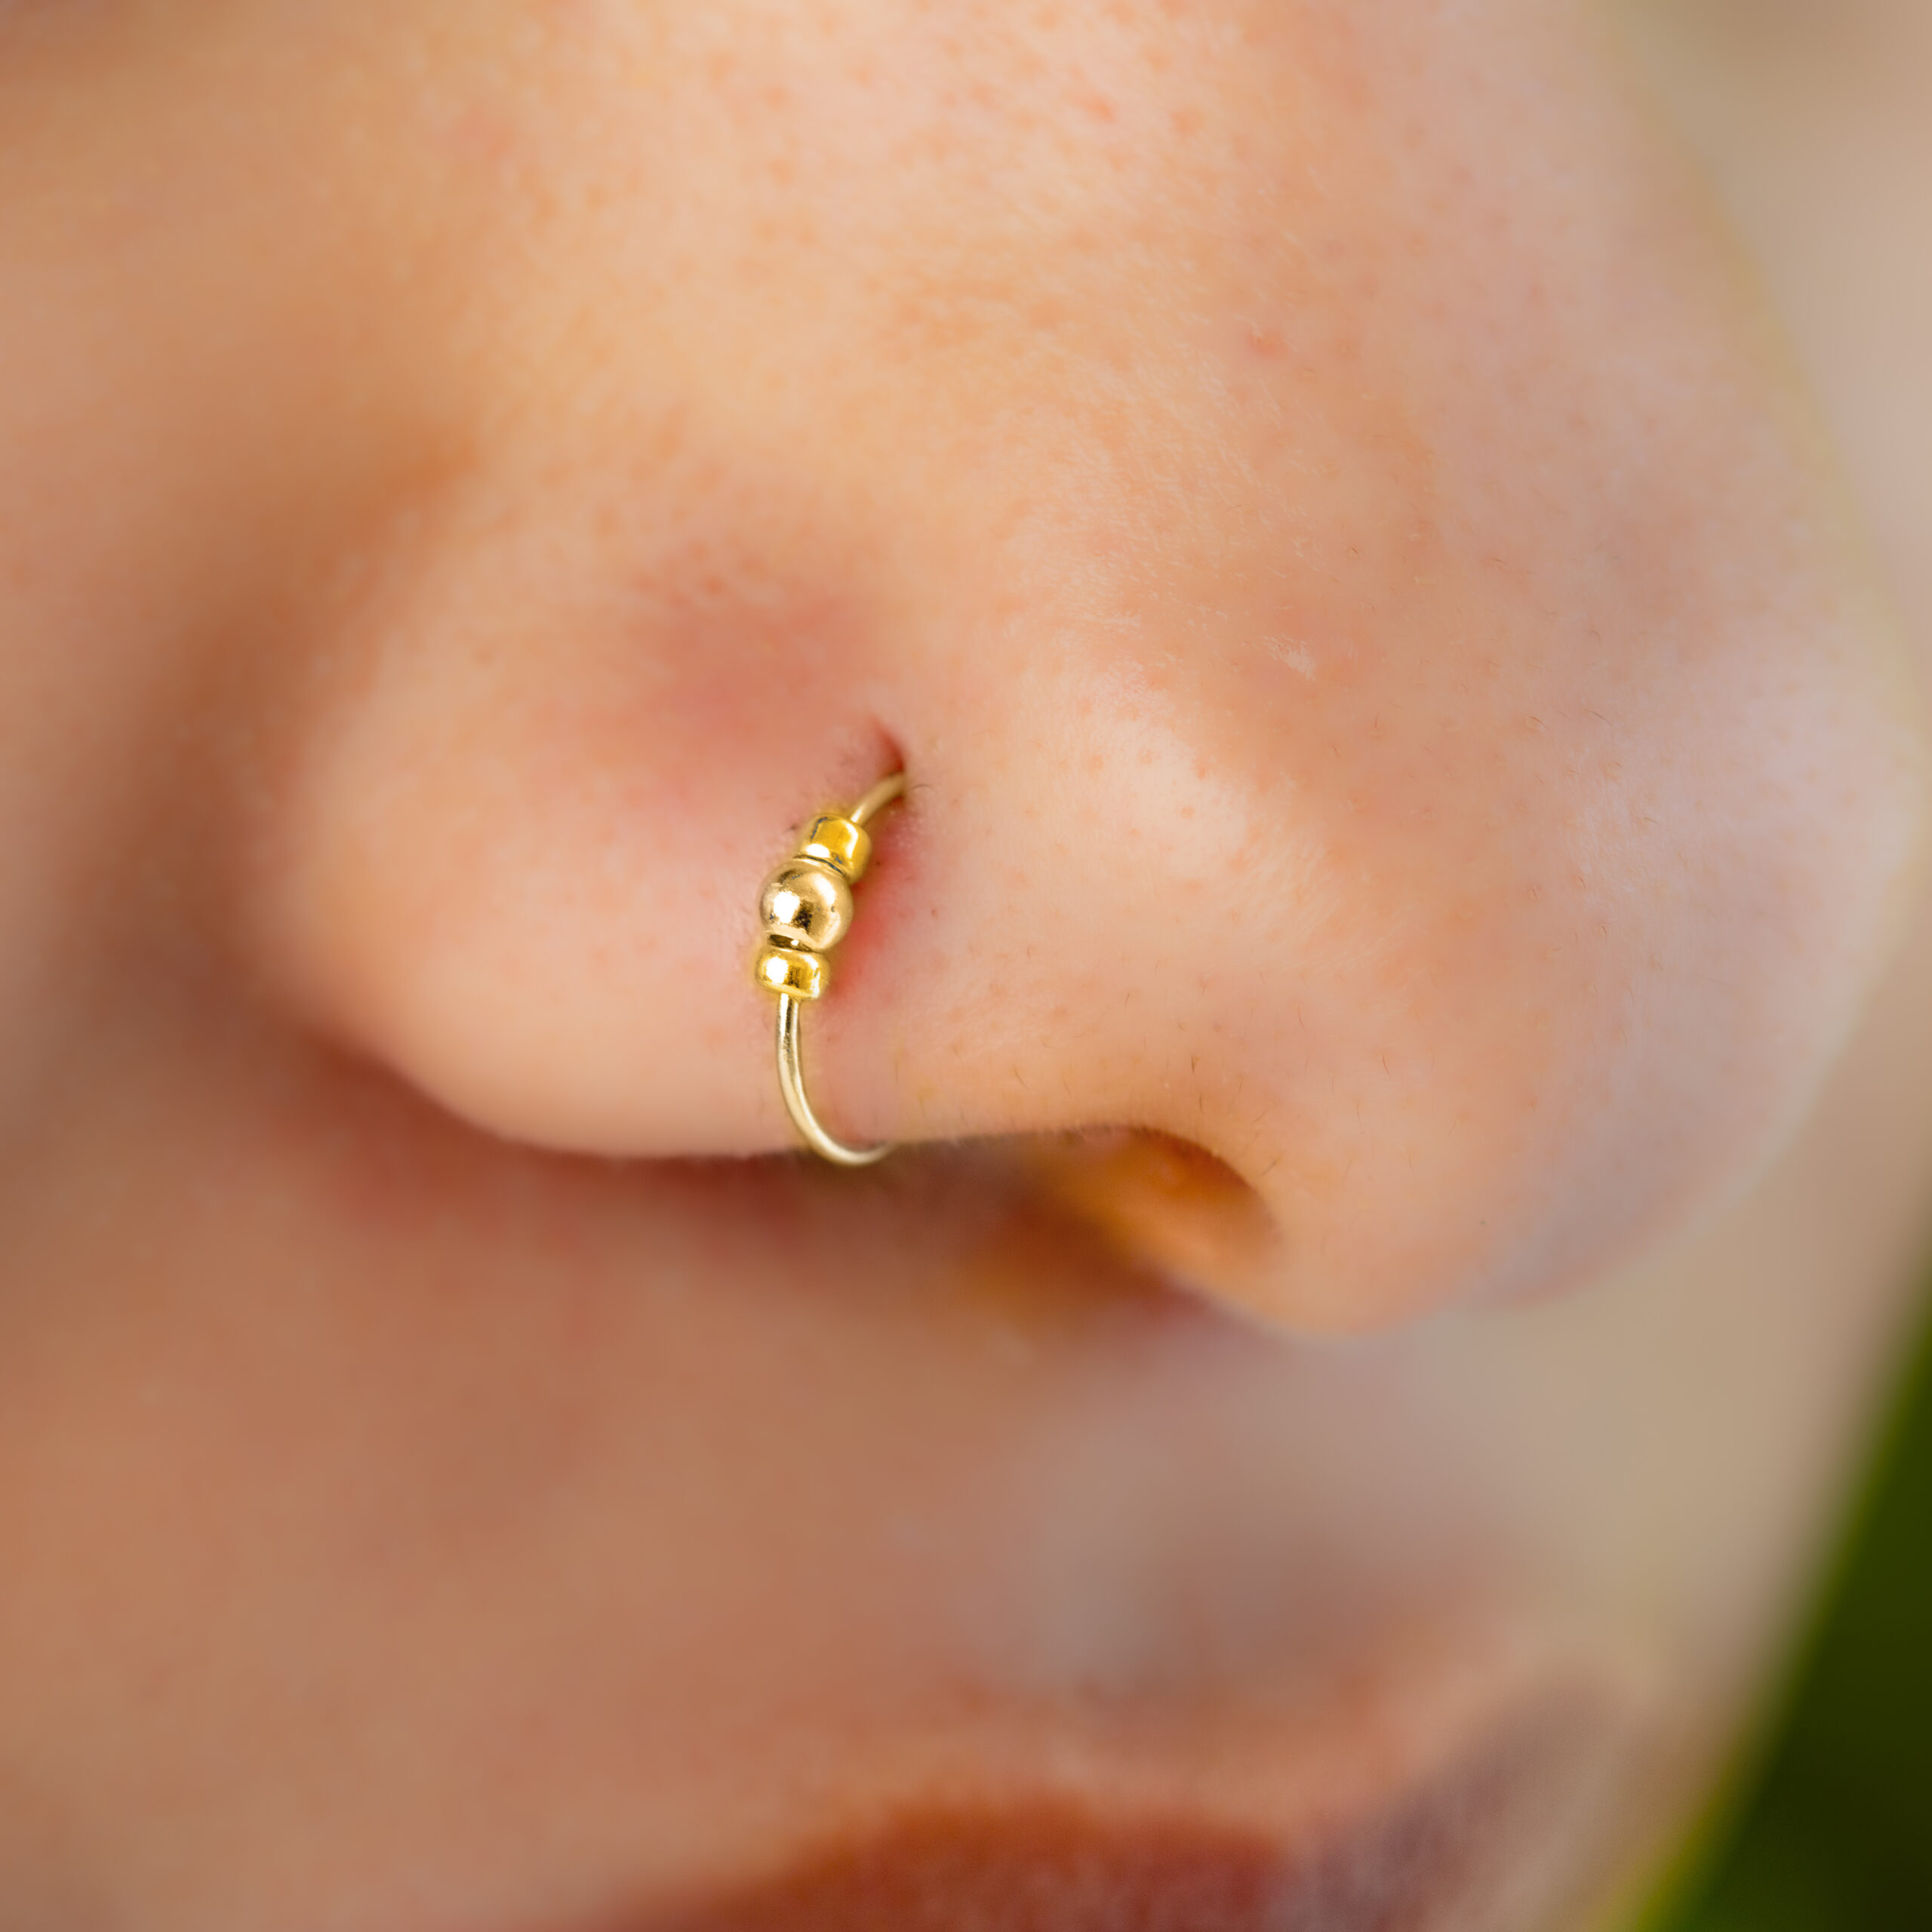 Tiny Nose Ring Hoop 24 G B Nose P Hoop 14k Gold F Nose P H Us 415 Drone School